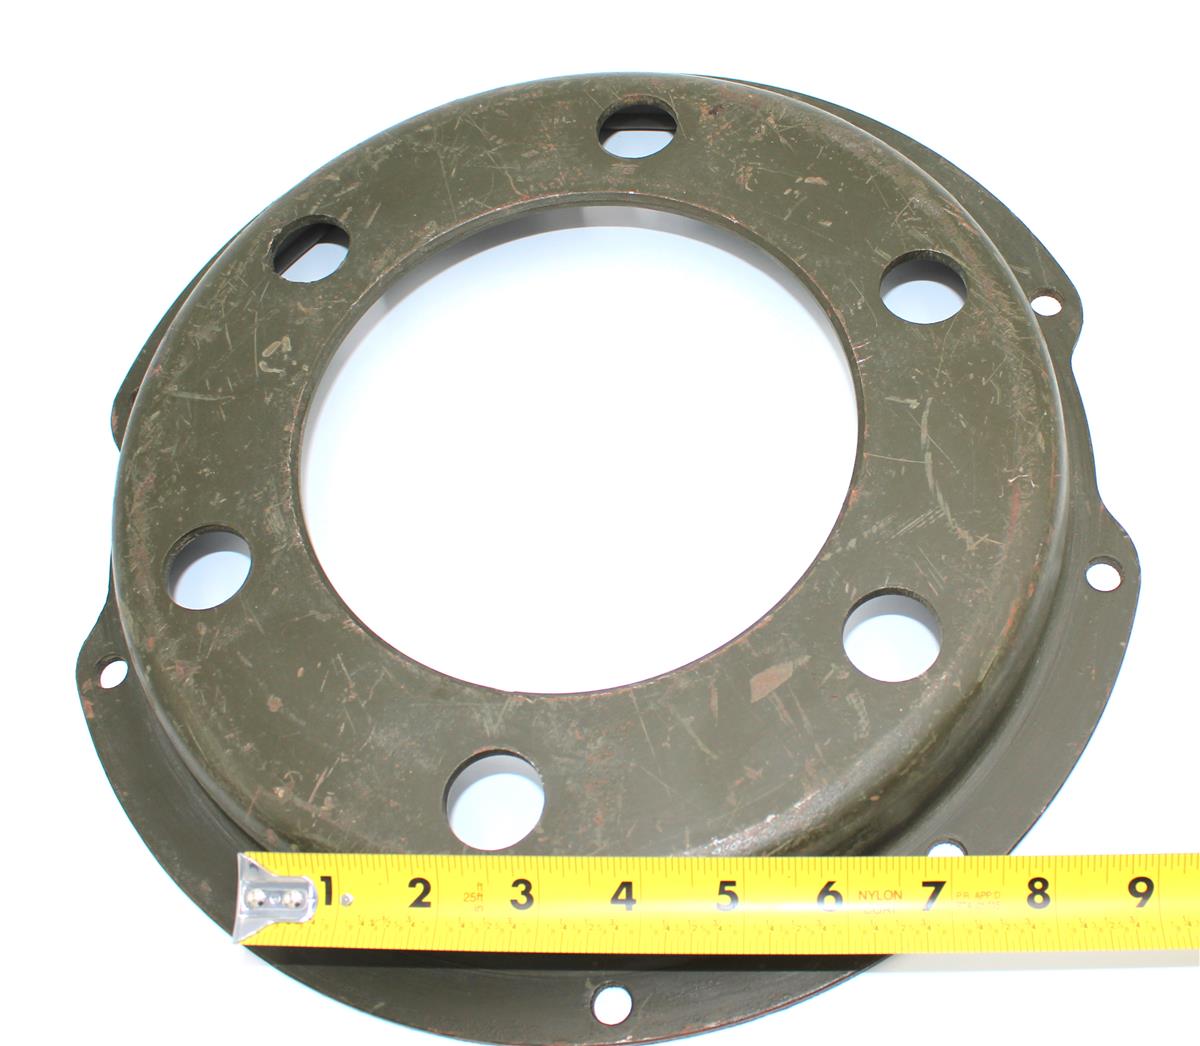 M35-843 | M35-843 Front Brake Drum Adapter Rockwell Steering Axle M35A2 (6).JPG